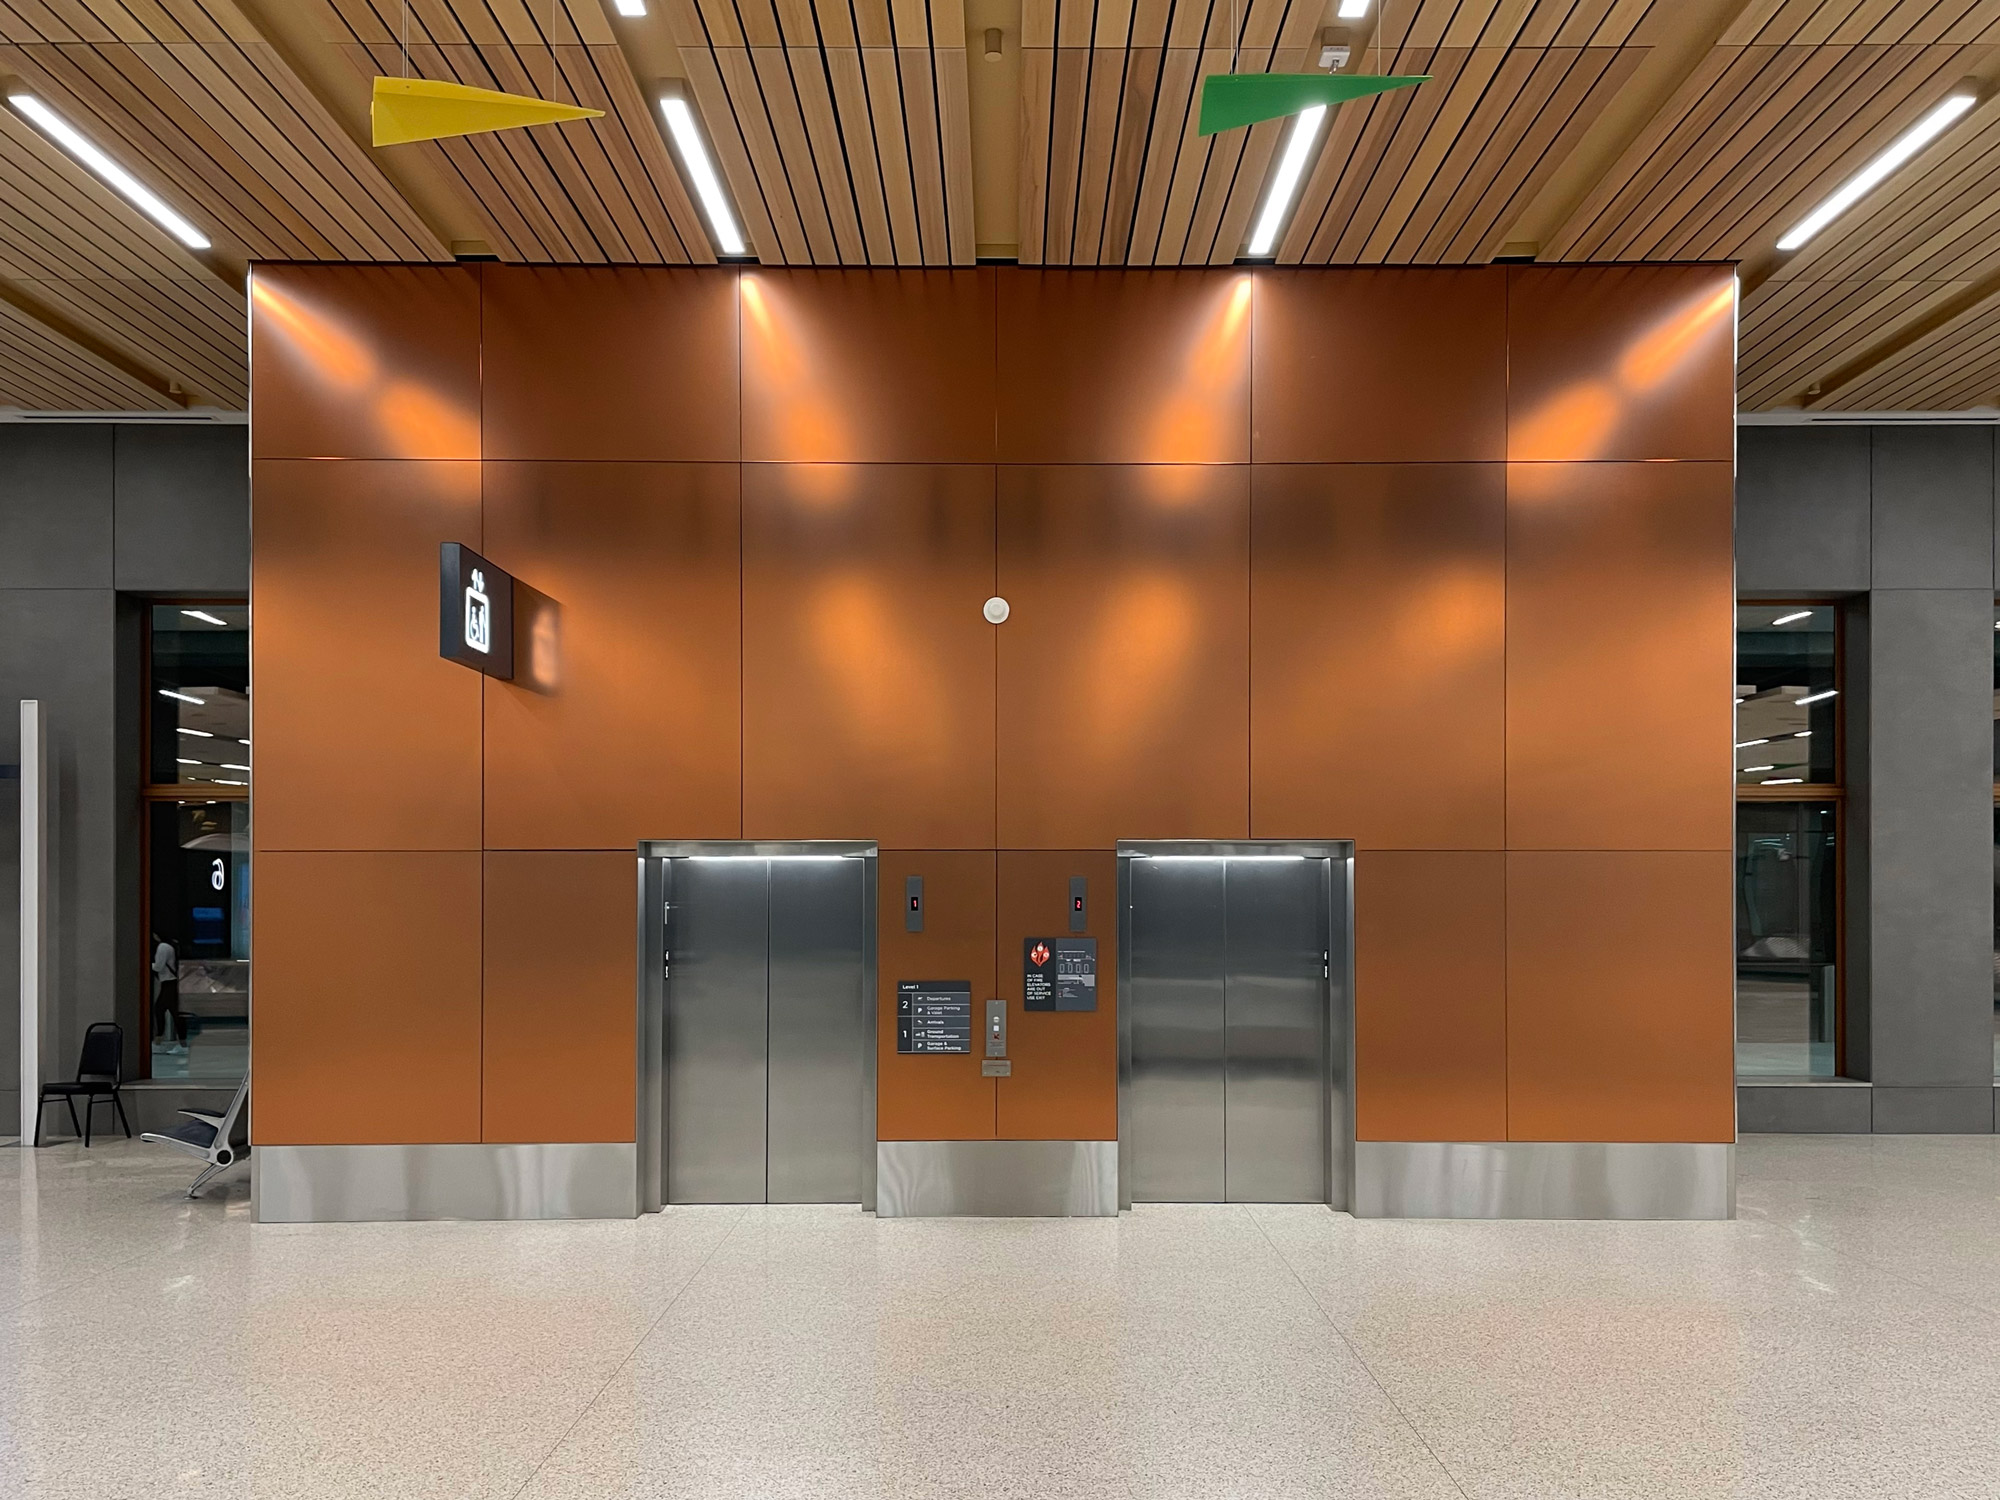 Elevators at KCI Airport with Bendheim glass.